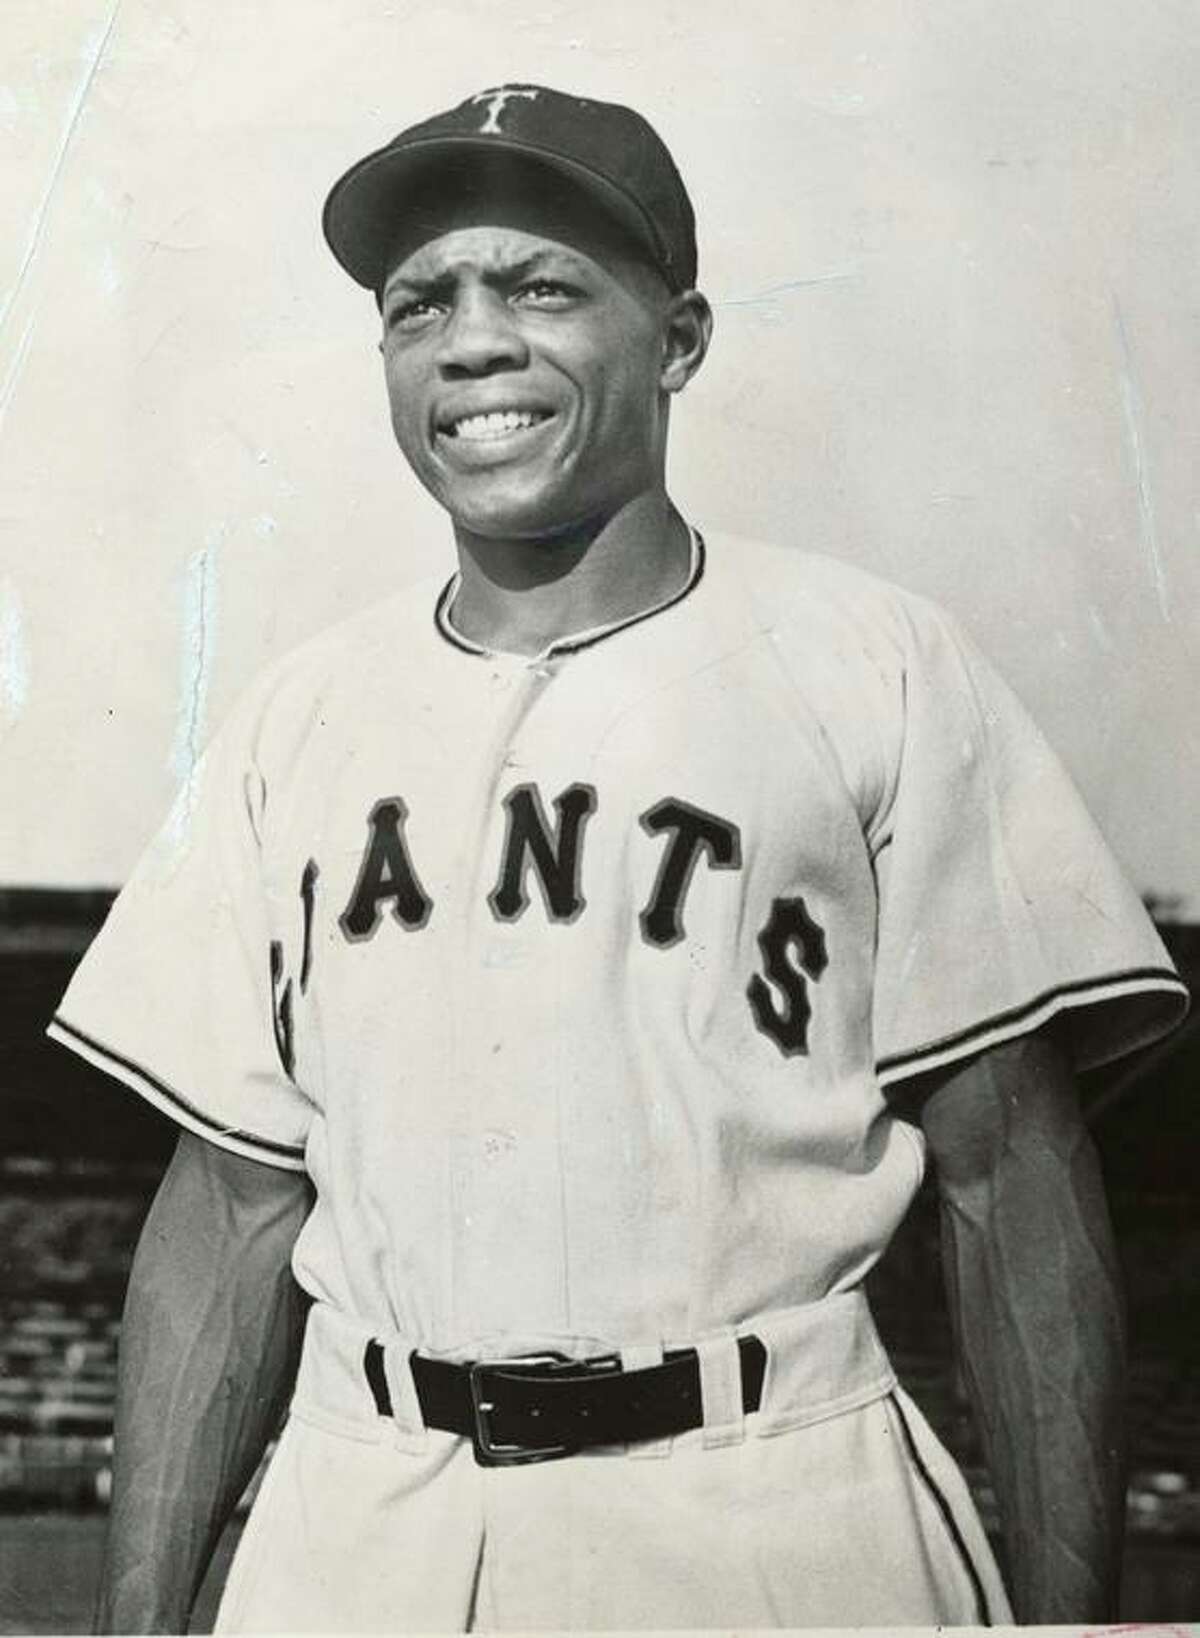 Willie Mays ‘24’ book excerpt: The Story of the Absurdity of Racism